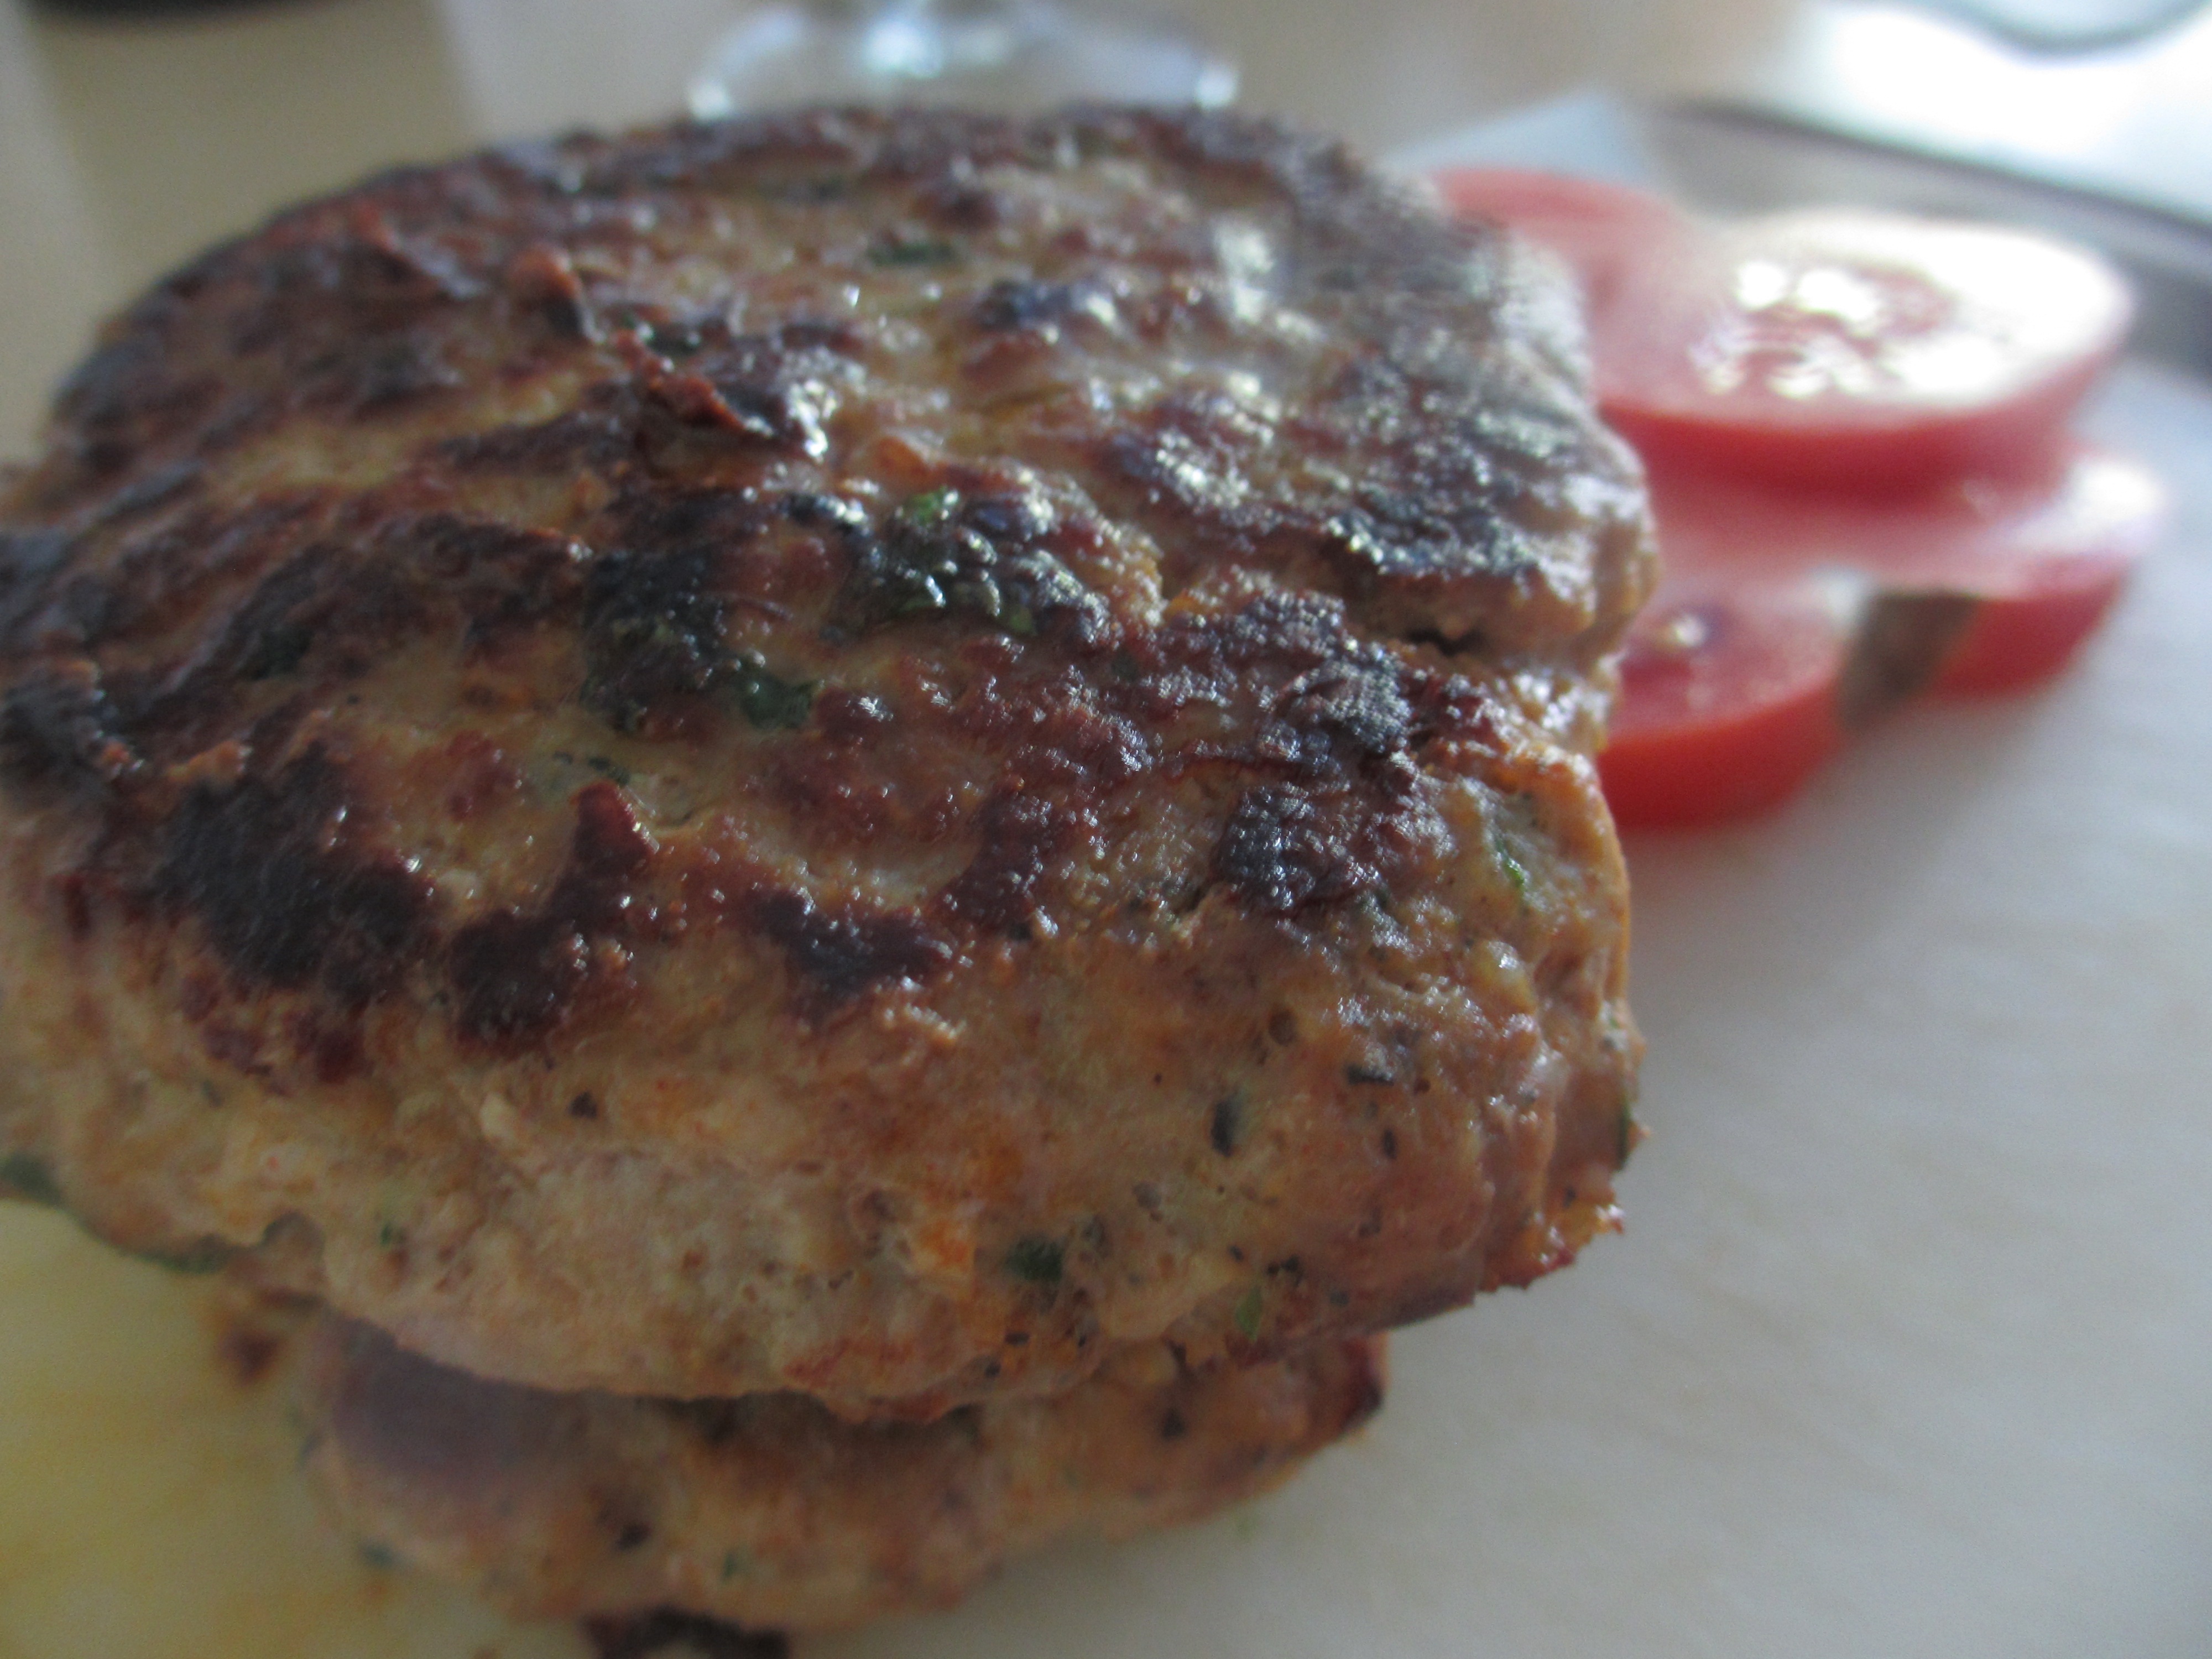 Turkey burgers, cooked